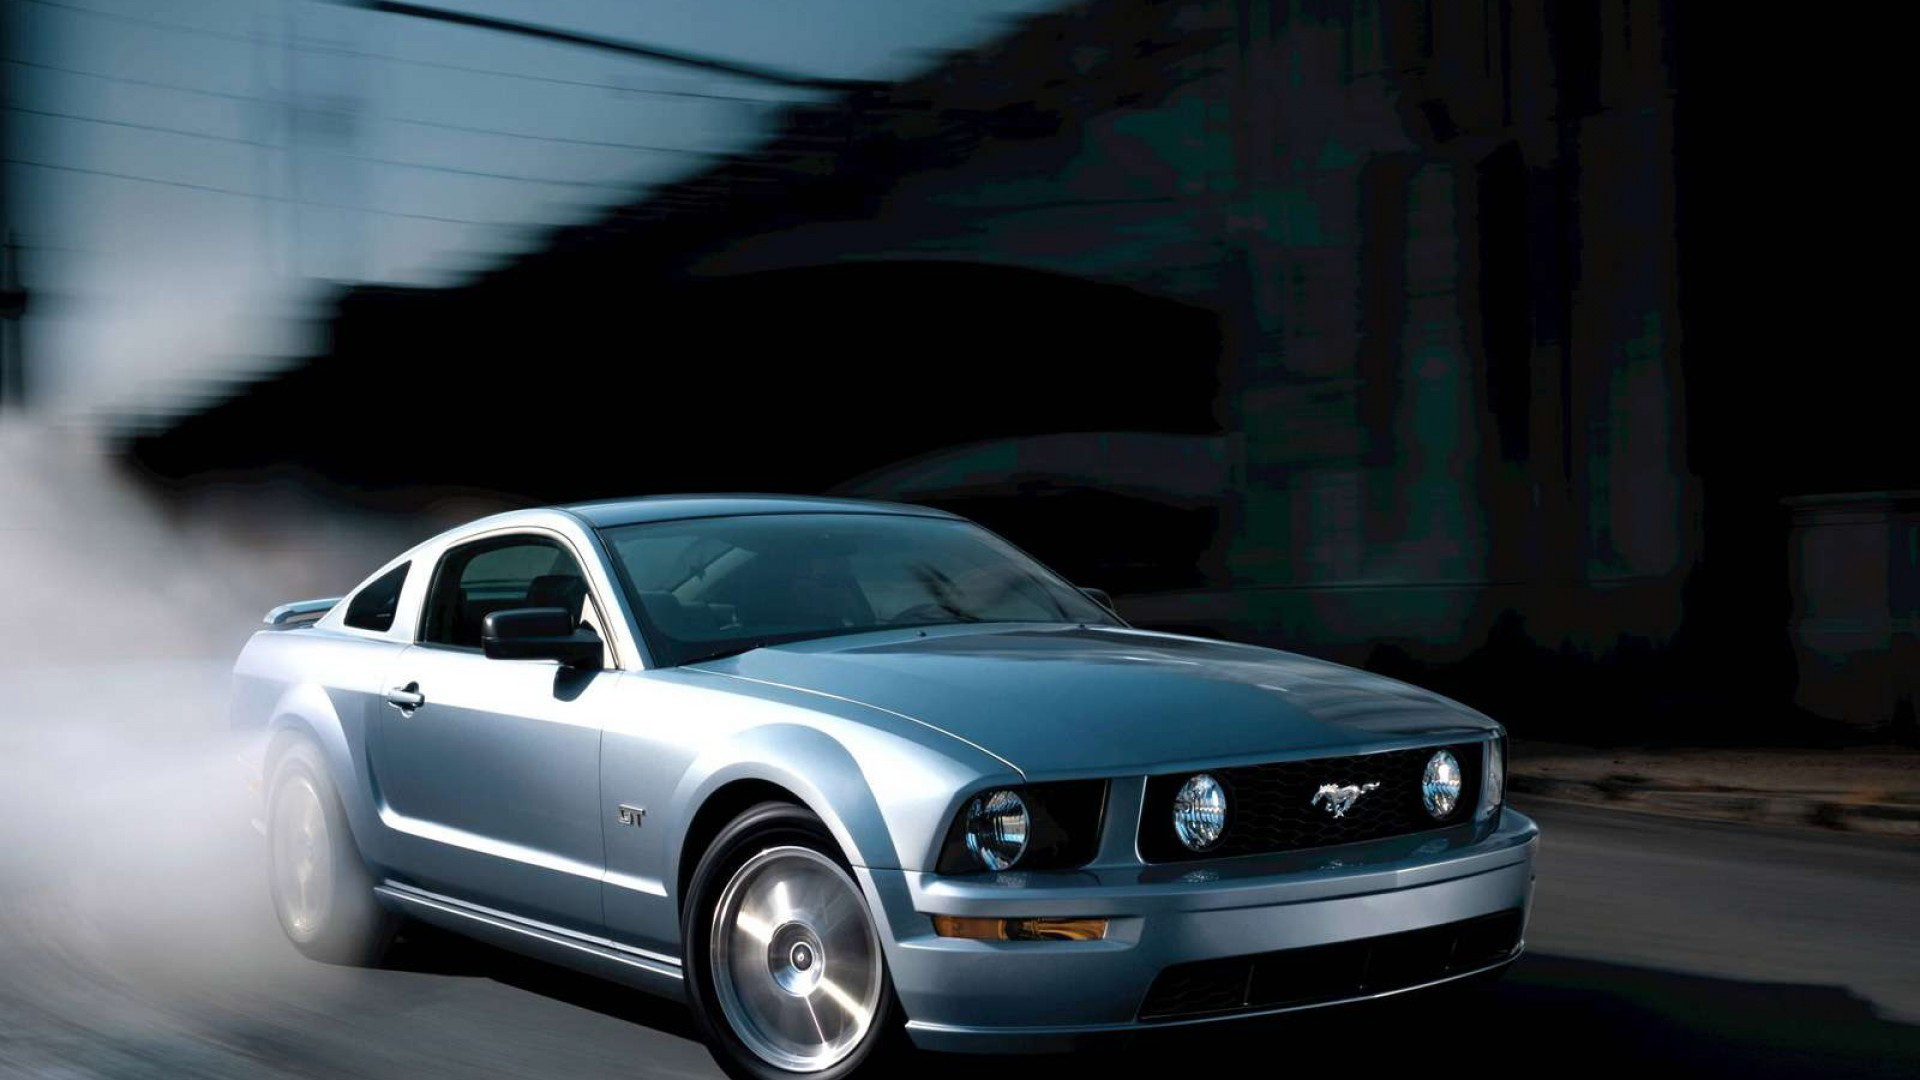 Ford Mustang GT Wallpapers, Pictures, Images